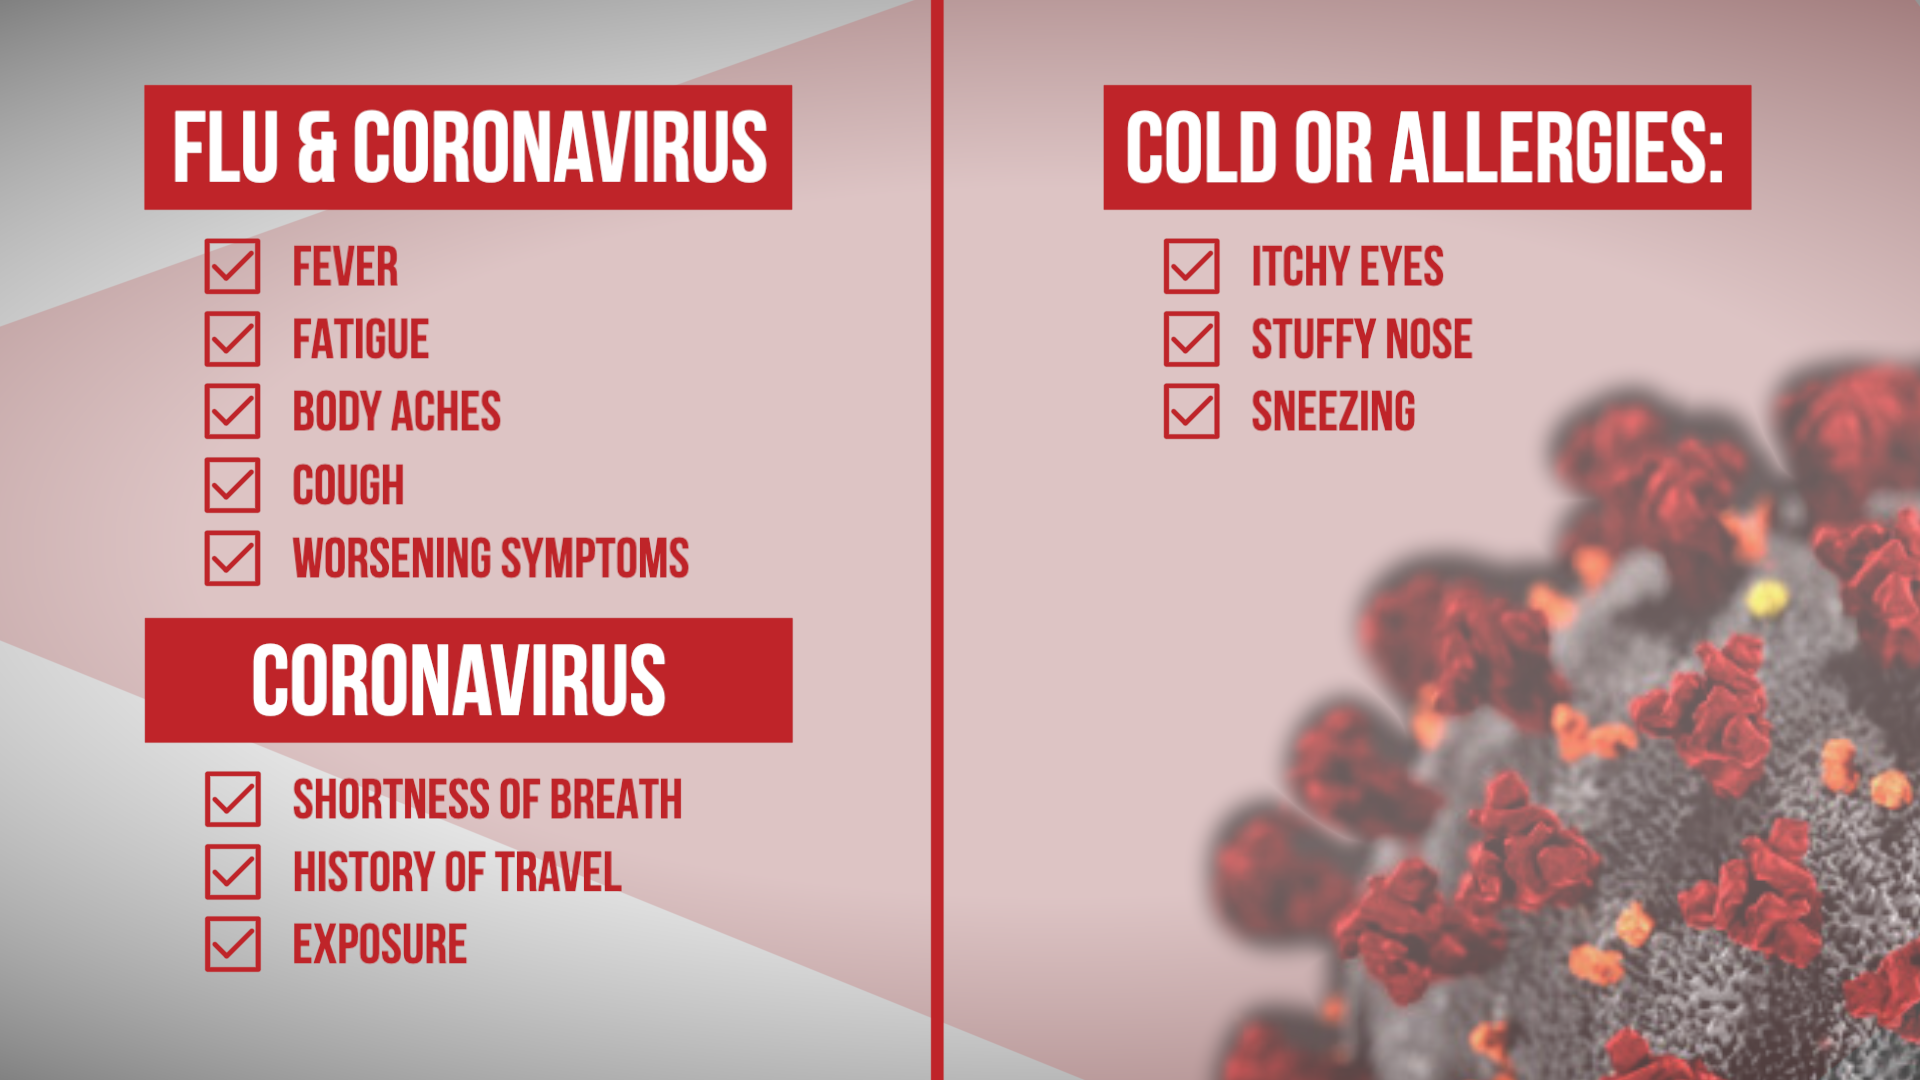 . The question arises how to distinguish between common cold and corona symptoms?